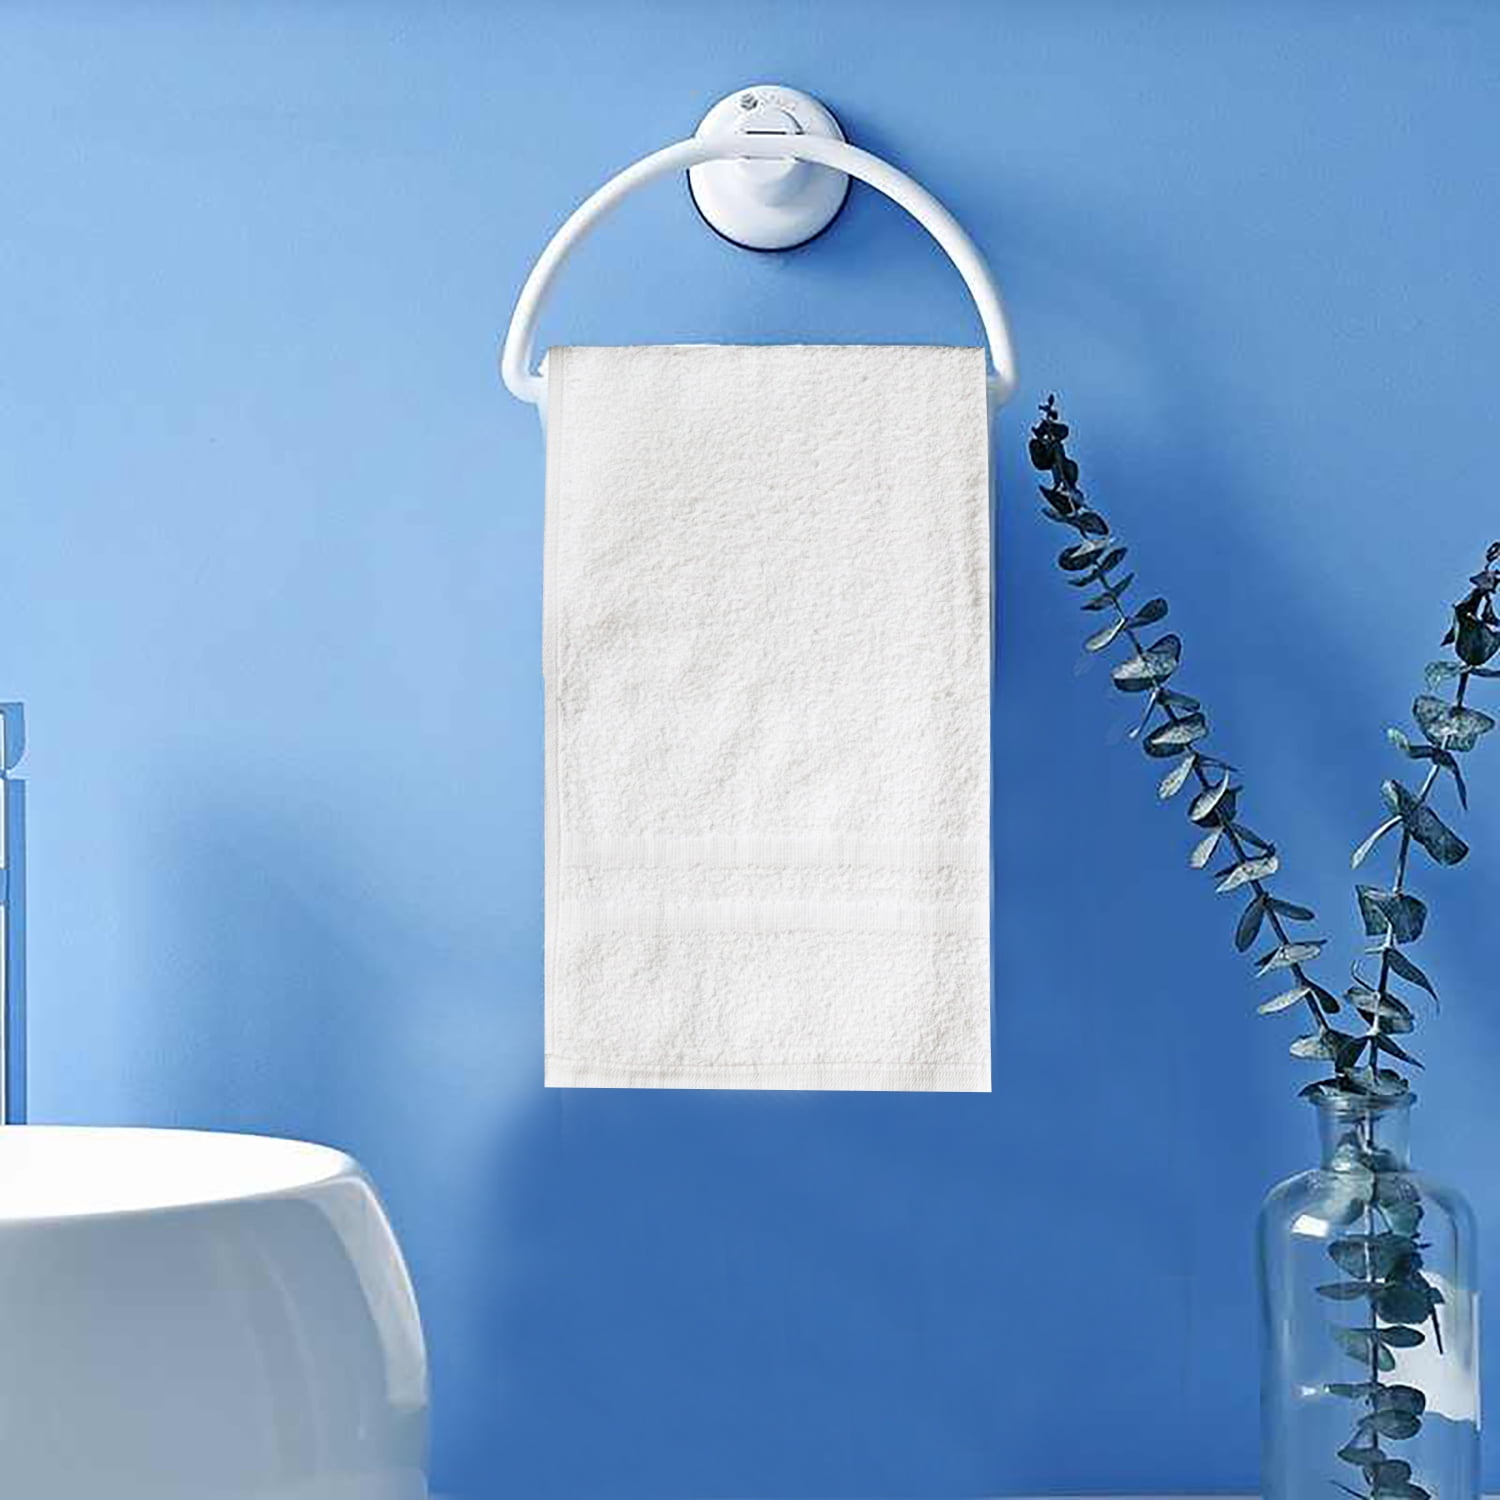 120 Bulk Pack New White ( 16x27 Inch ) Towels for Hand- Salon-Gym & Kitchen